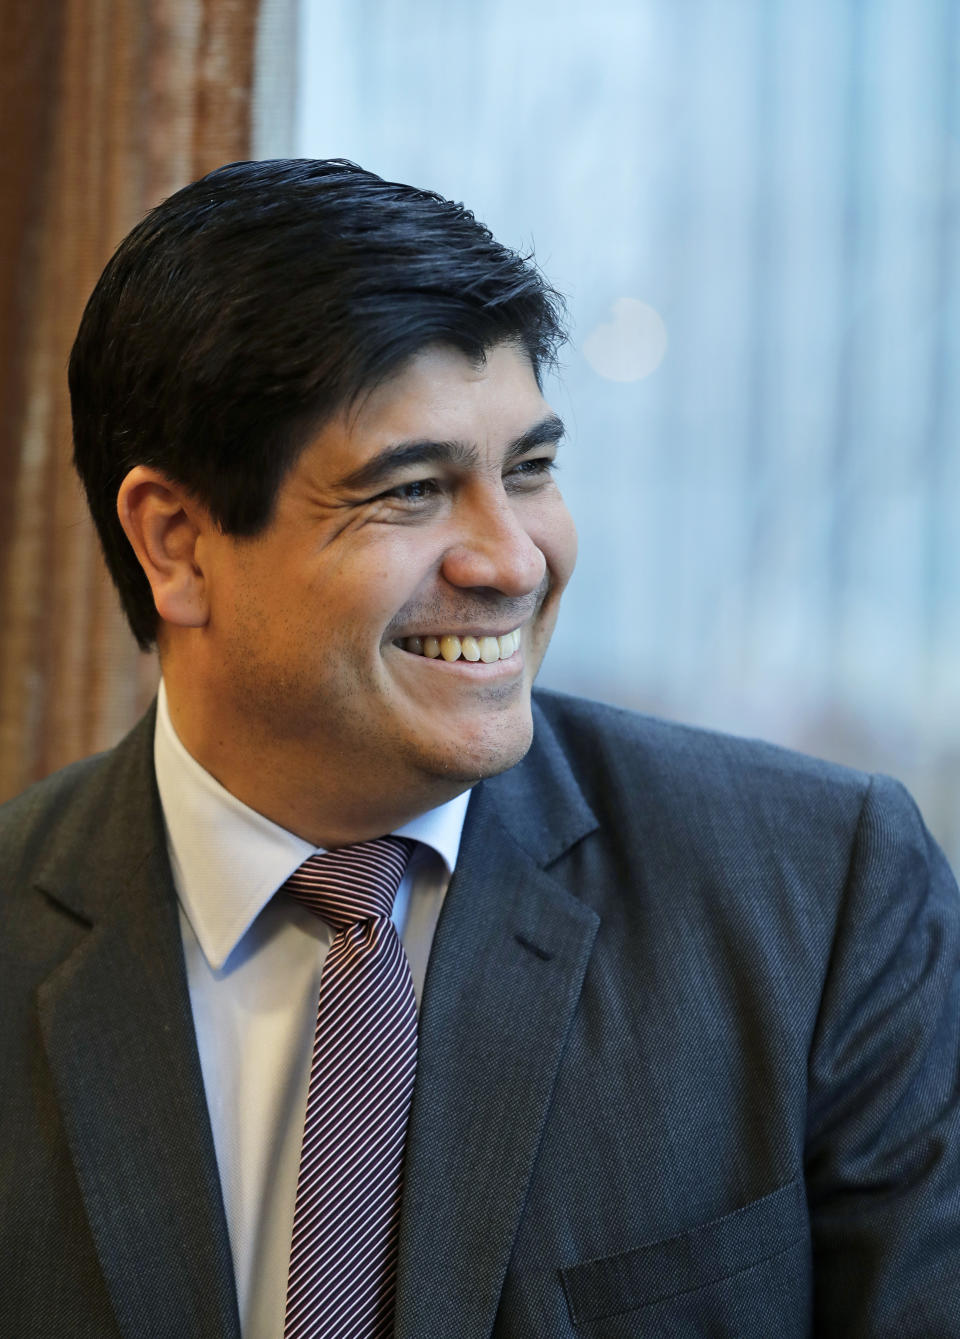 In this Monday, March 11, 2019, photo, Costa Rican president Carlos Alvarado smiles as he poses for a photo before an interview with The Associated Press in Seattle. Alvarado said that Central America should not be satisfied until Nicaragua holds free elections and re-establishes a free press, democracy and human rights guarantees, and that turmoil in Nicaragua is having an impact on regional immigration and the economy. (AP Photo/Ted S. Warren)